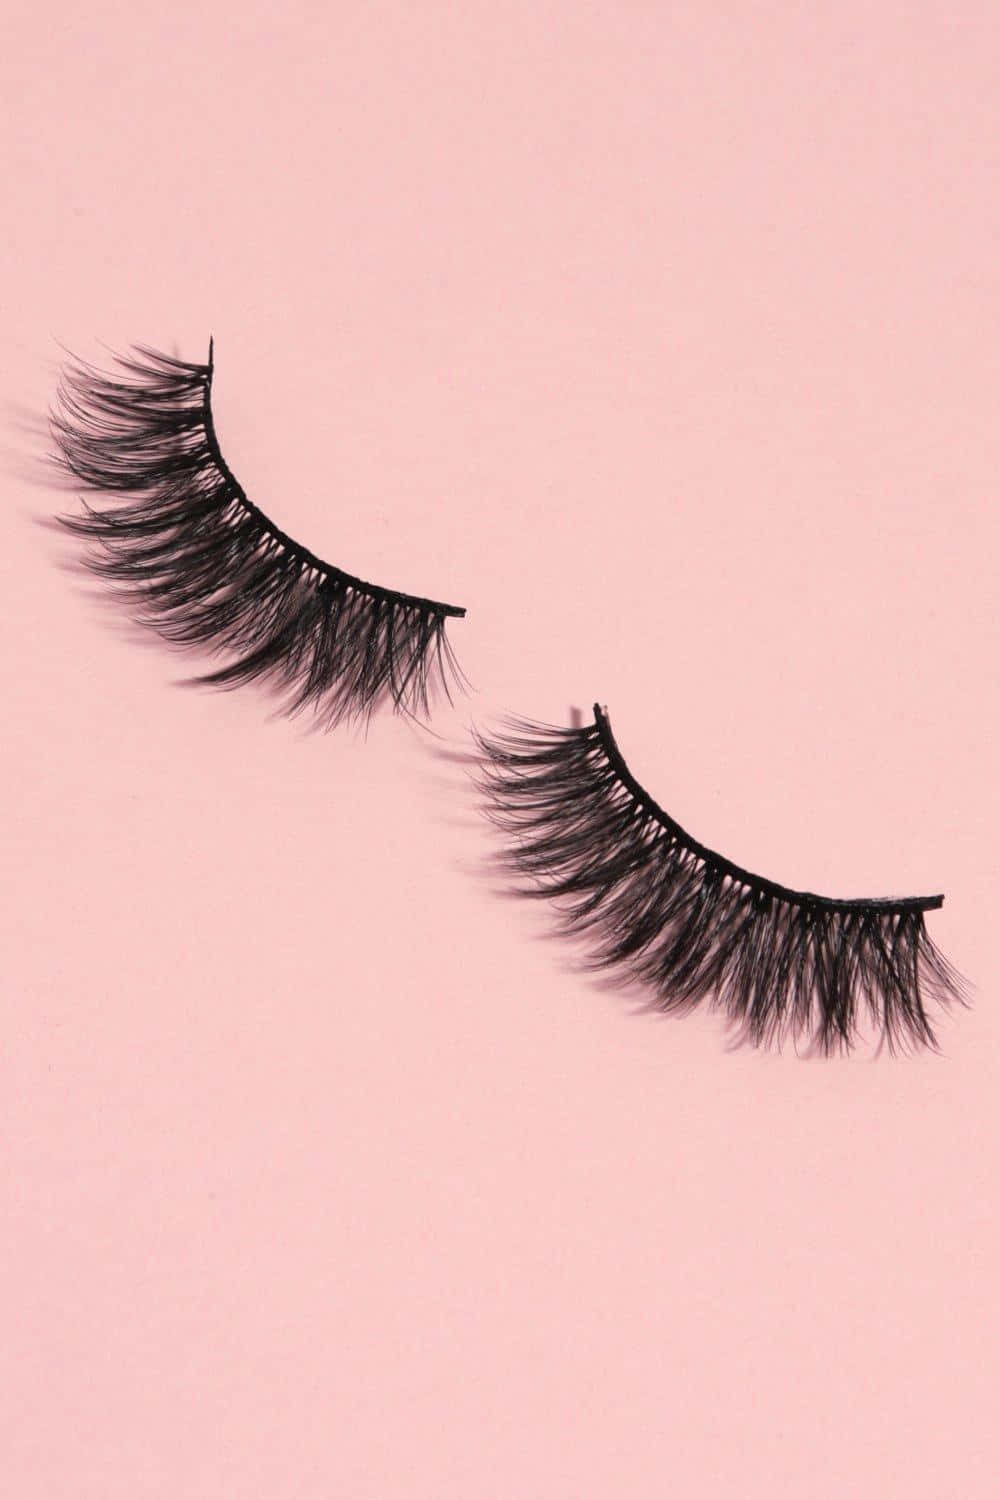 A Pair Of False Eyelashes On A Pink Background